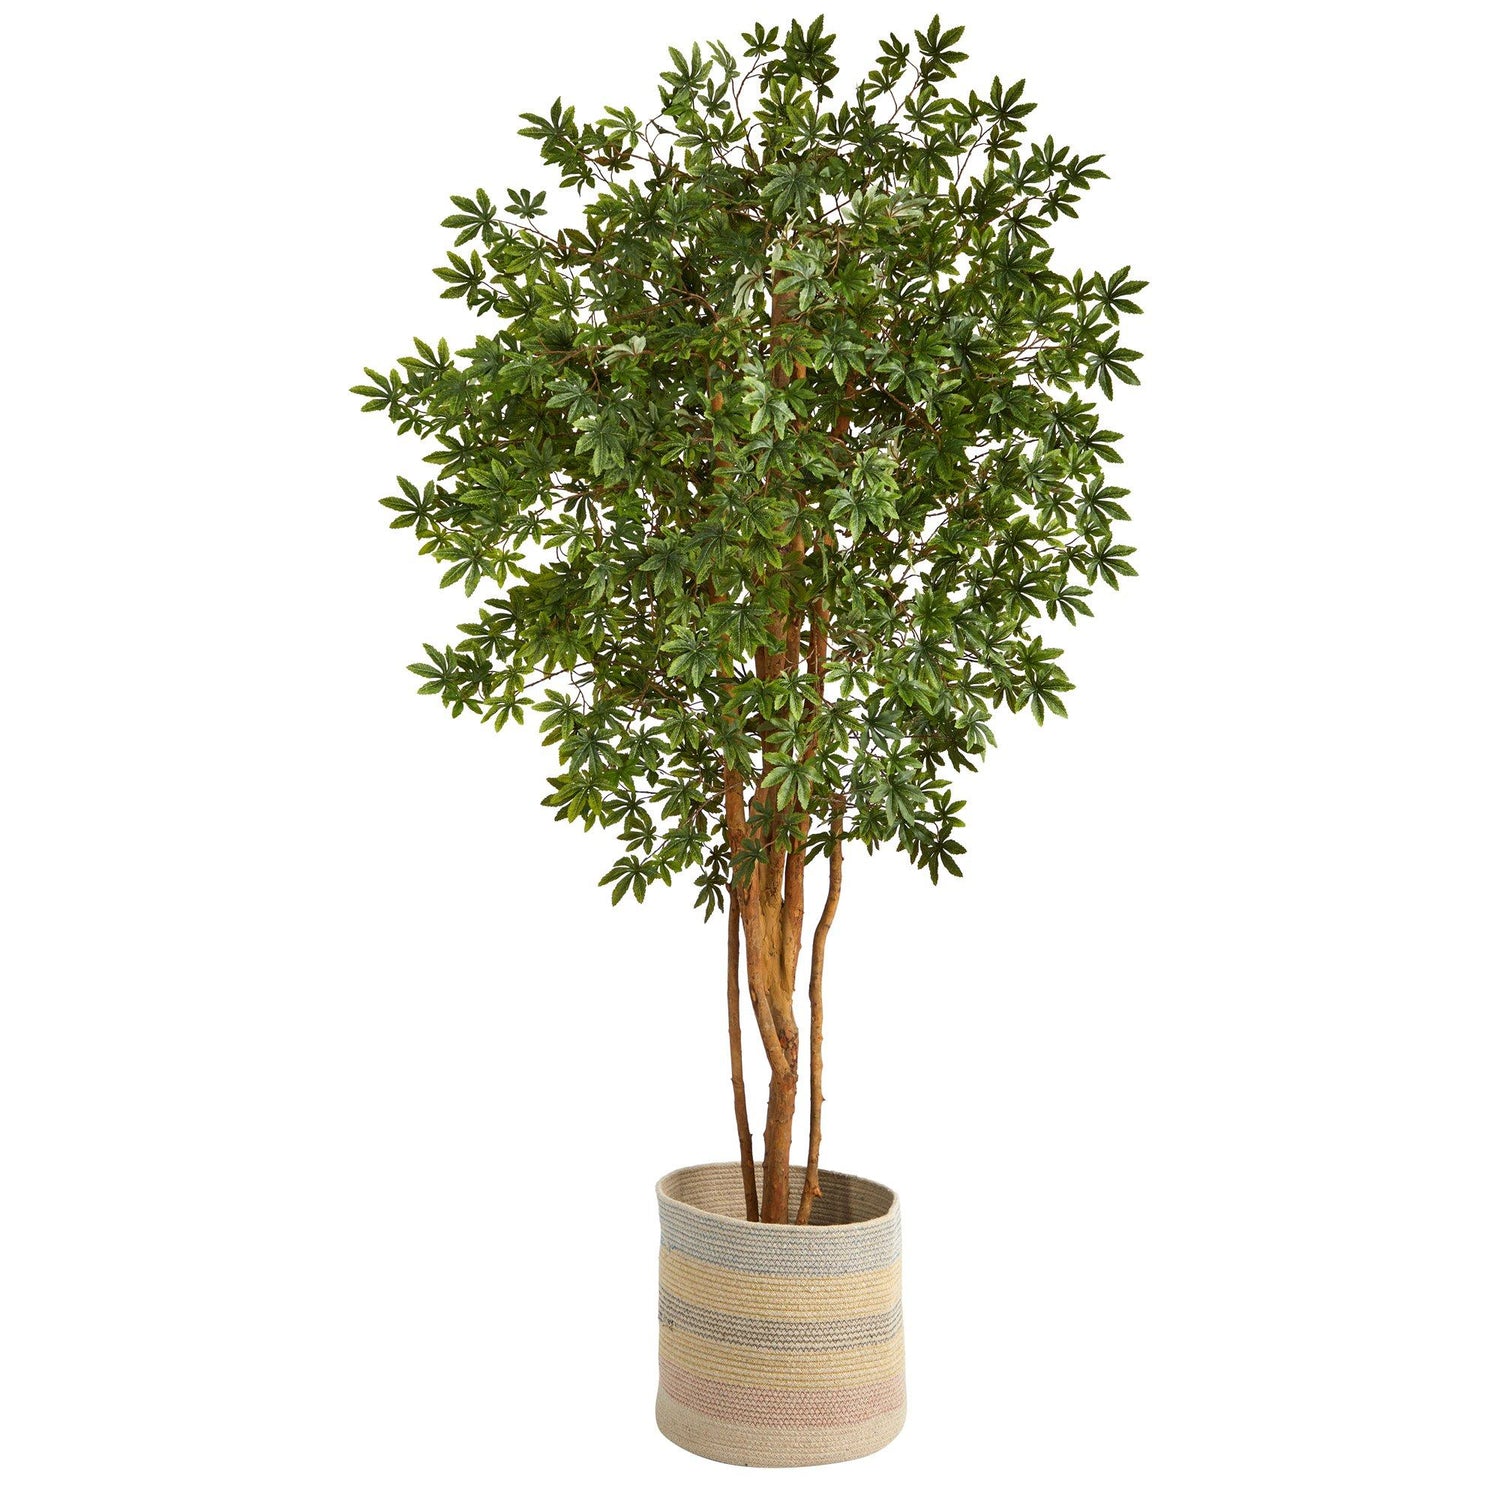 6’ Japanese Maple Artificial Tree in Handmade Natural Cotton Multicolored Woven Planter